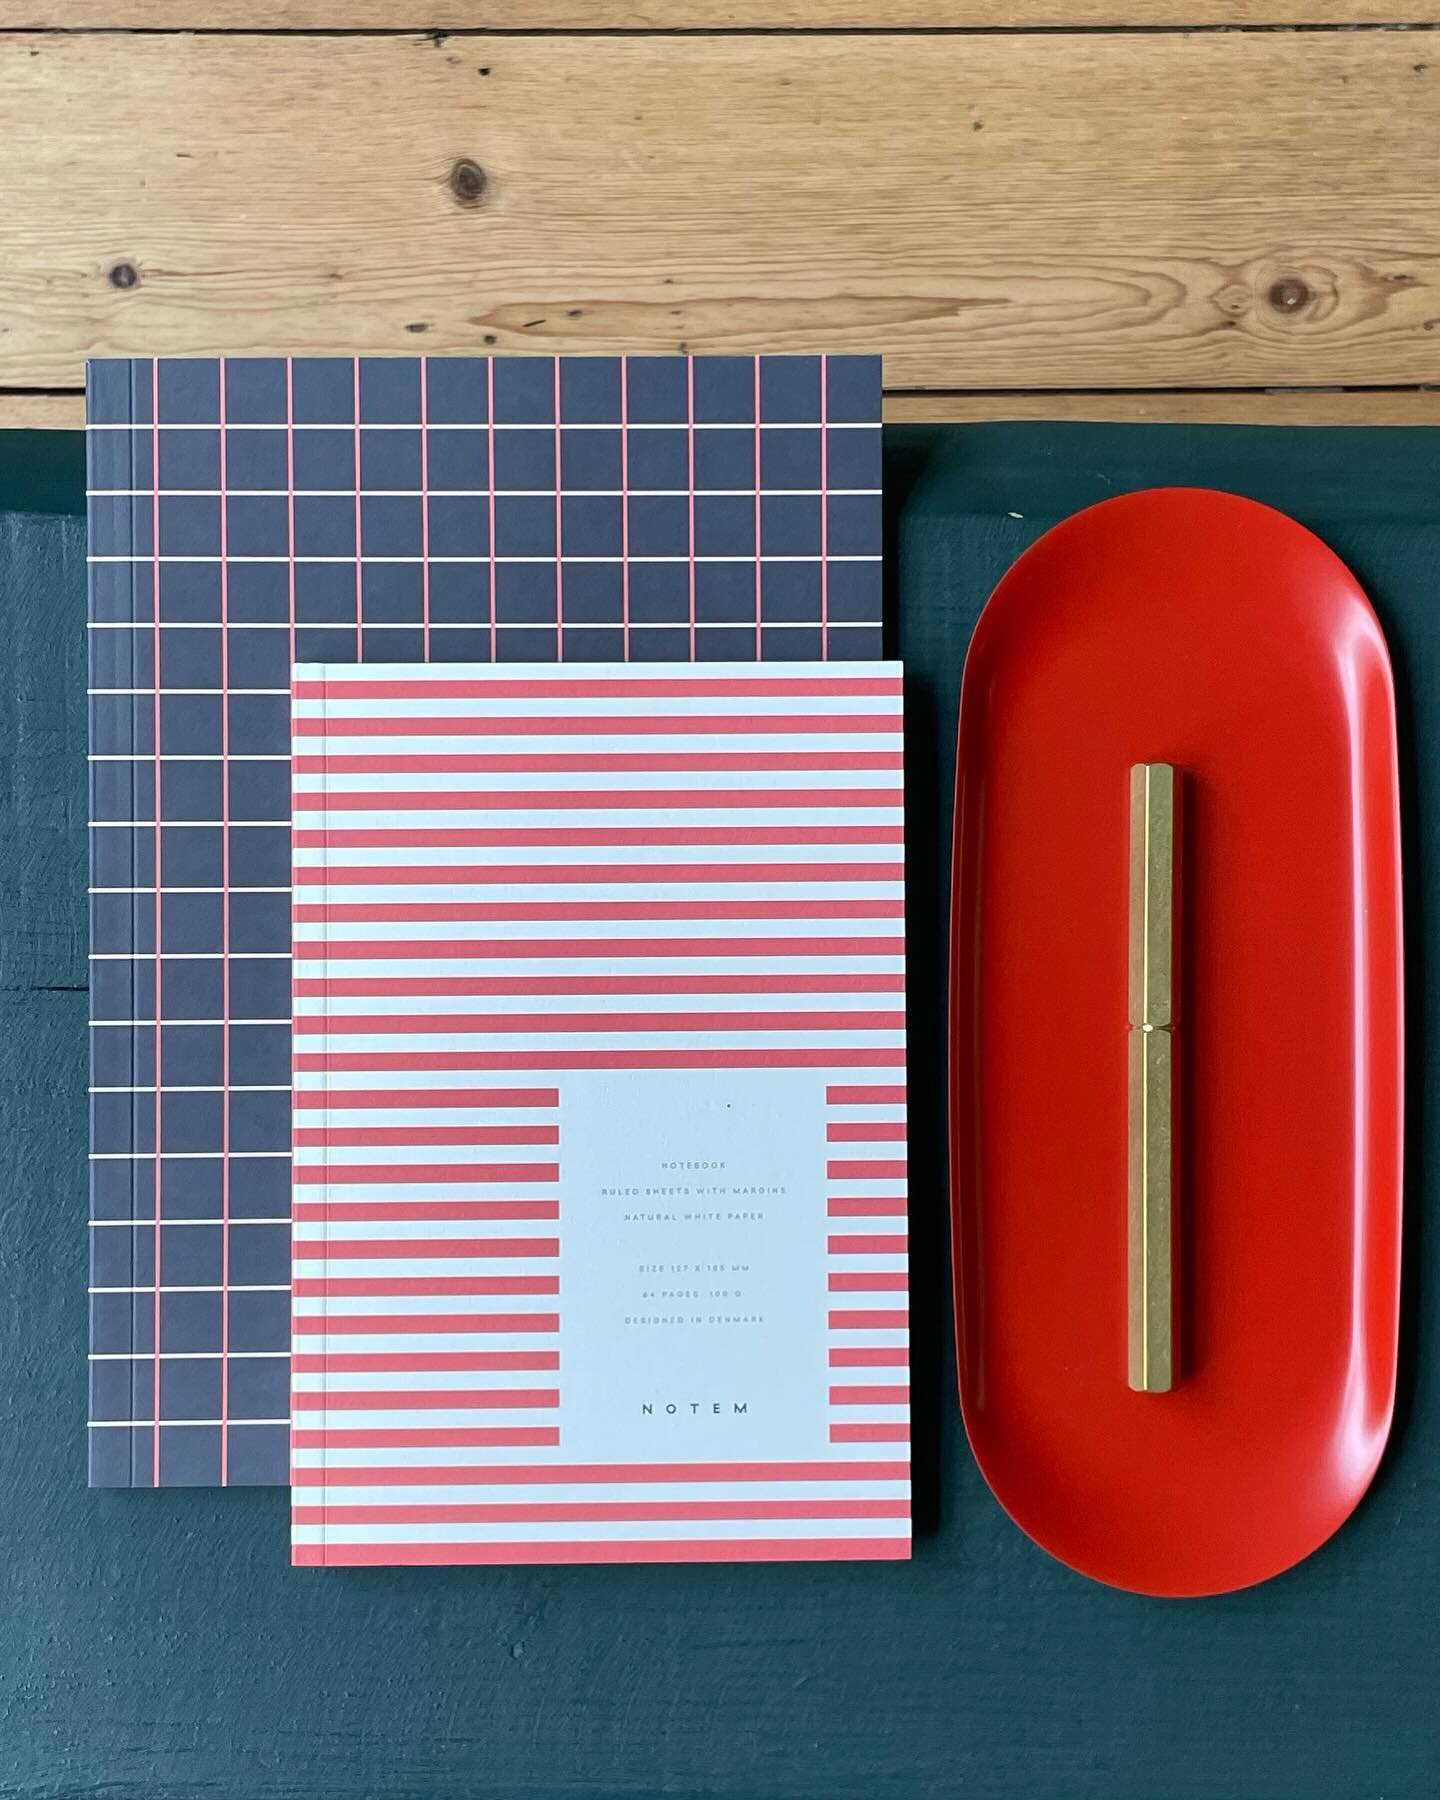 Stripes or squares? Green, blue or red?  Small or big? Which combo is for you 🤩? 1️⃣2️⃣3️⃣or 4️⃣ ?

P A P I E R. Paper, drawings &amp; more

~~~
#papier #papierbrussels #papeterieoriginale #papeterie #stationerystore #stationeryaddict #stationerylov